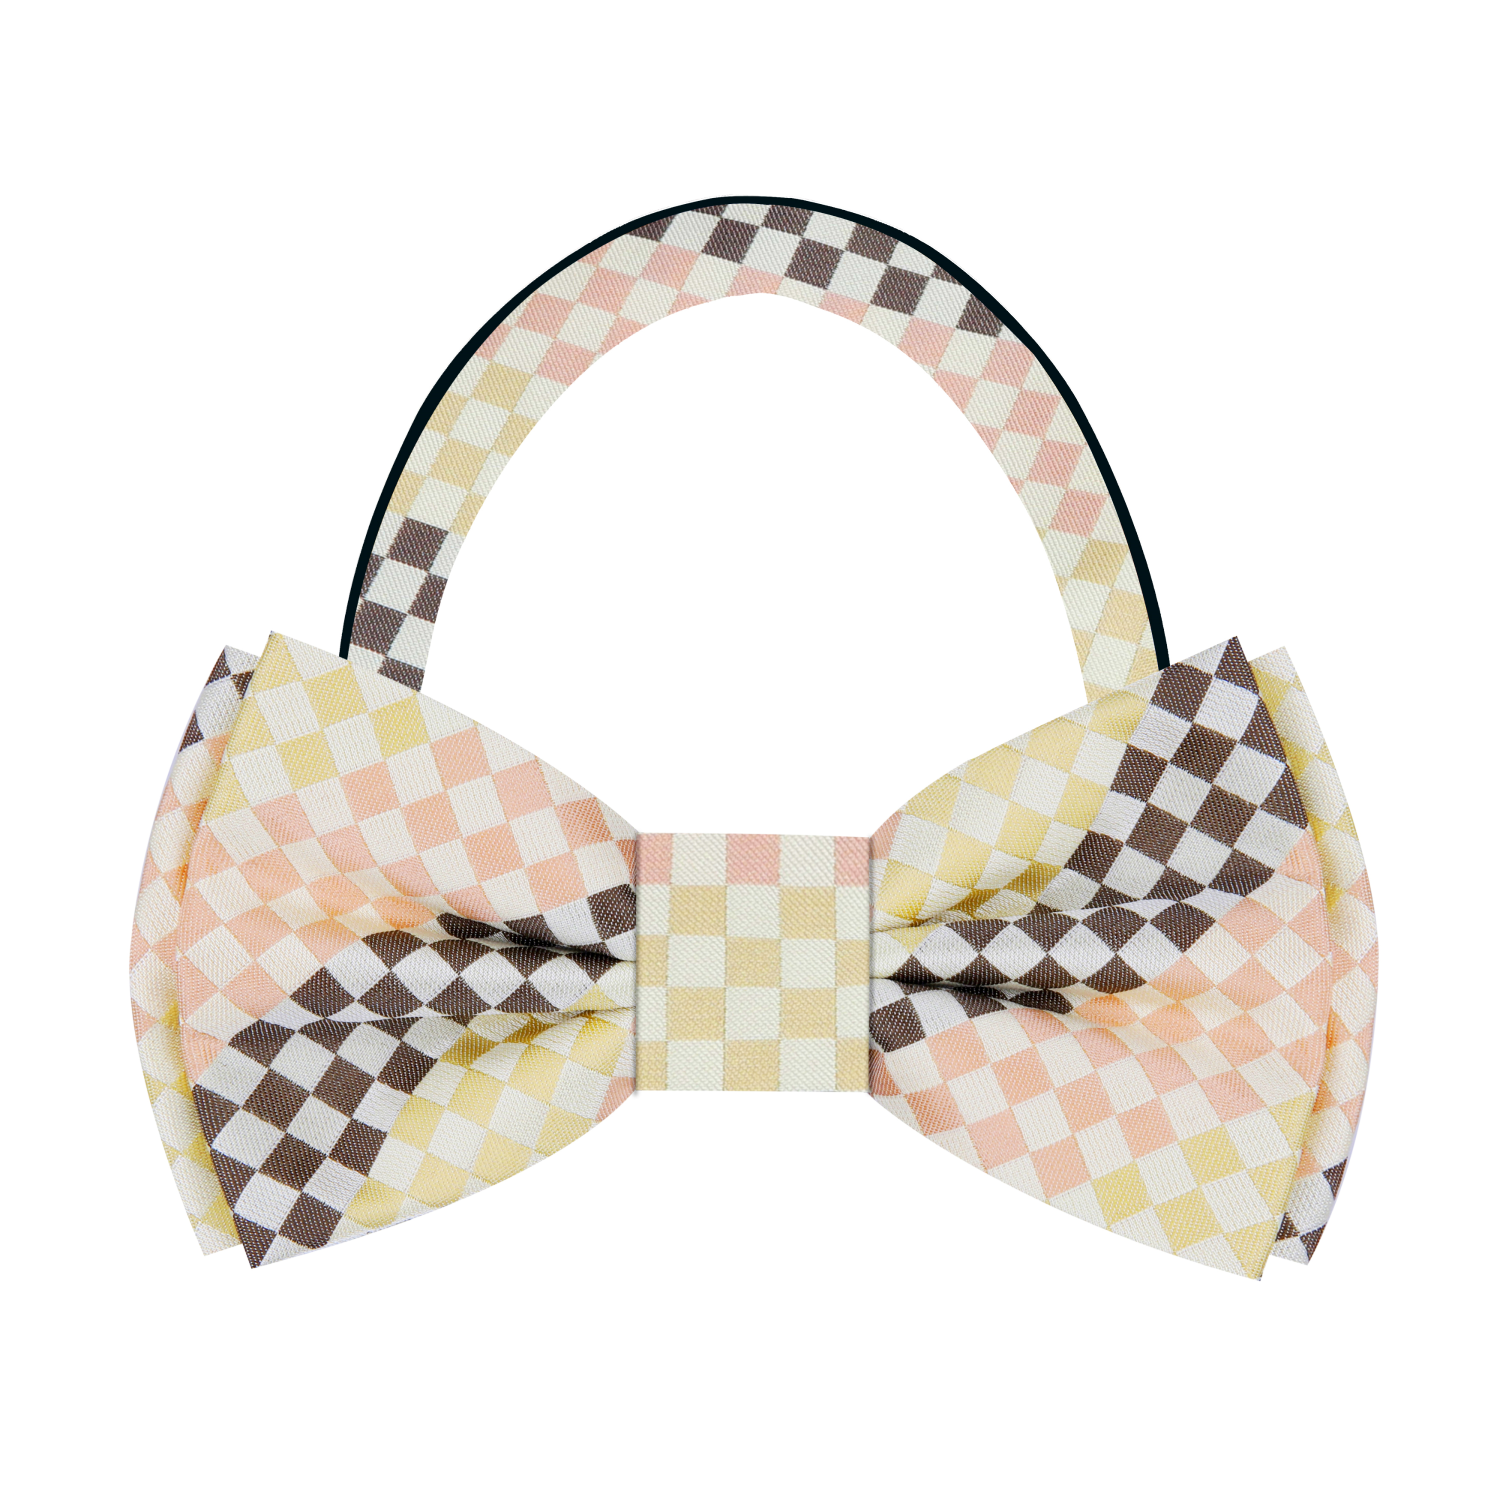 Peach, Brown, Light Yellow Check Bow Tie Pre Tied